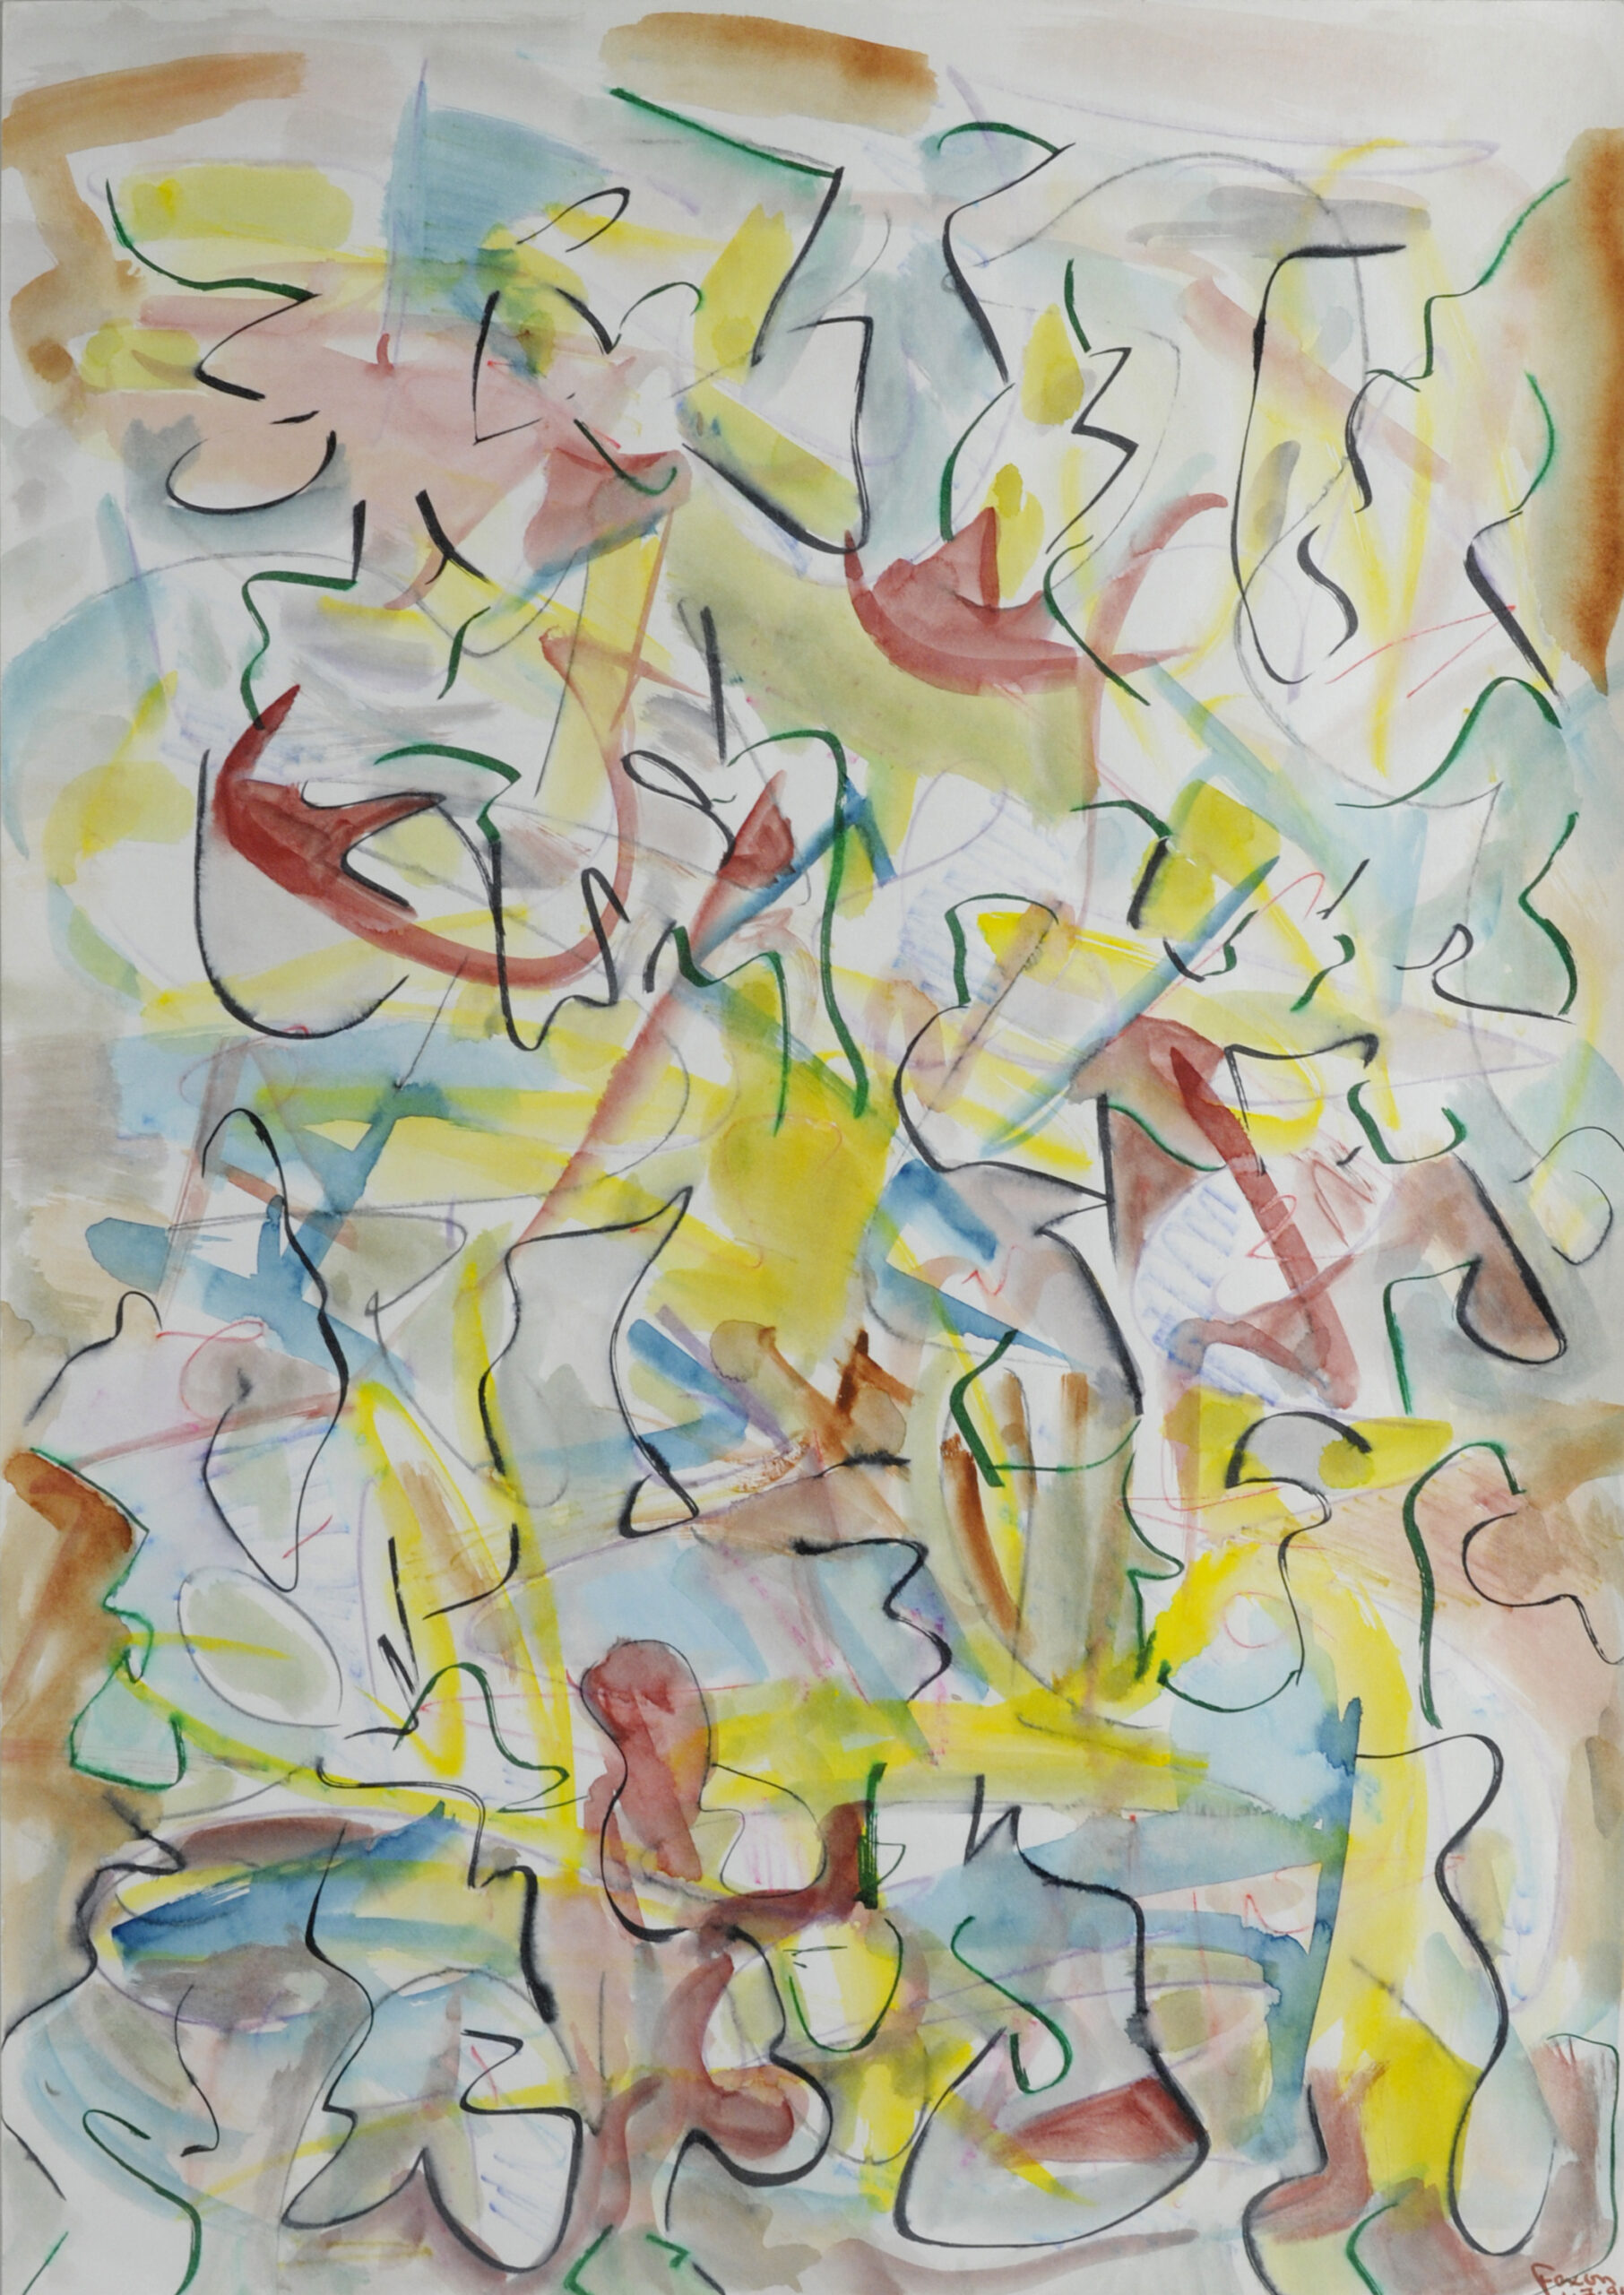 Jack Faxon, Untitled Abstraction, 1994, watercolor on paper. Courtesy of Jack Faxon Trust. 